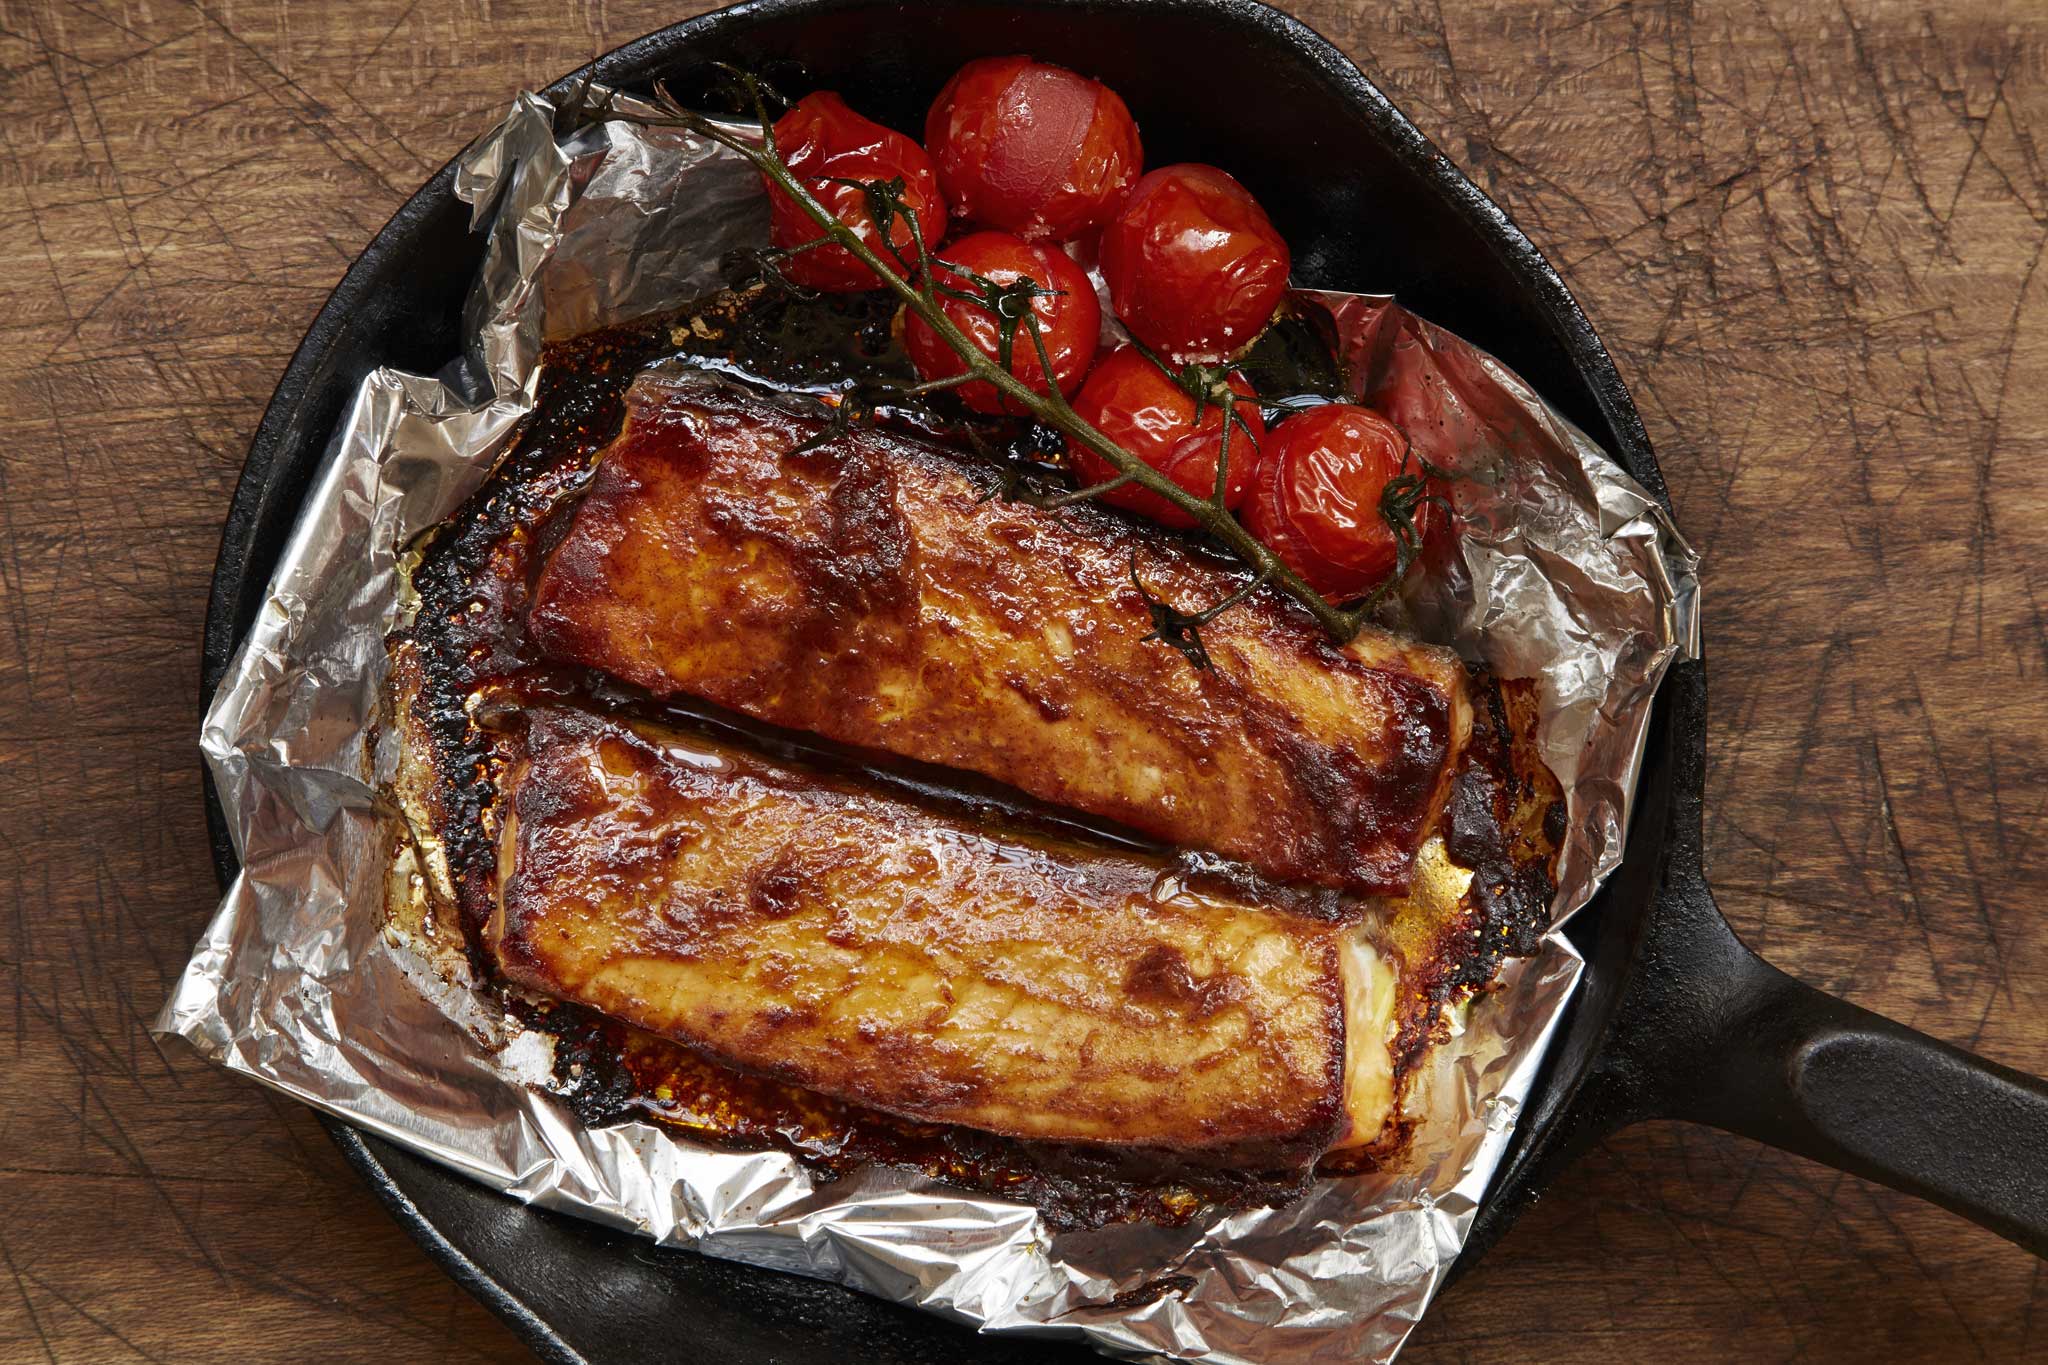 Barbecue-style salmon belly with roast cherry vine tomatoes